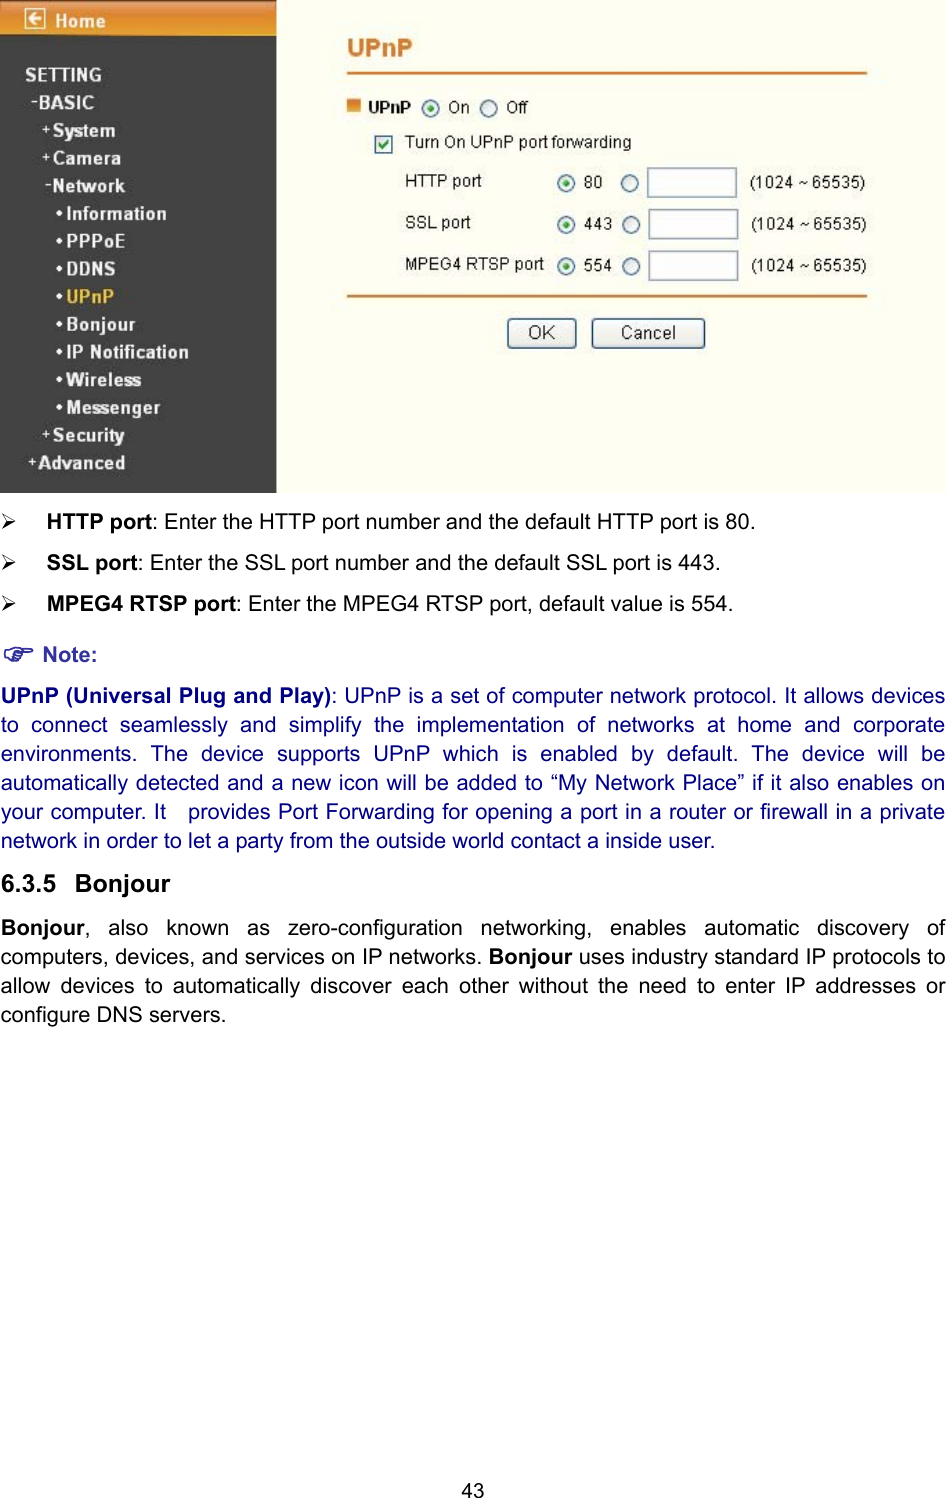 43  ¾ HTTP port: Enter the HTTP port number and the default HTTP port is 80. ¾ SSL port: Enter the SSL port number and the default SSL port is 443. ¾ MPEG4 RTSP port: Enter the MPEG4 RTSP port, default value is 554. ) Note: UPnP (Universal Plug and Play): UPnP is a set of computer network protocol. It allows devices to connect seamlessly and simplify the implementation of networks at home and corporate environments. The device supports UPnP which is enabled by default. The device will be automatically detected and a new icon will be added to “My Network Place” if it also enables on your computer. It    provides Port Forwarding for opening a port in a router or firewall in a private network in order to let a party from the outside world contact a inside user. 6.3.5  Bonjour Bonjour, also known as zero-configuration networking, enables automatic discovery of computers, devices, and services on IP networks. Bonjour uses industry standard IP protocols to allow devices to automatically discover each other without the need to enter IP addresses or configure DNS servers. 